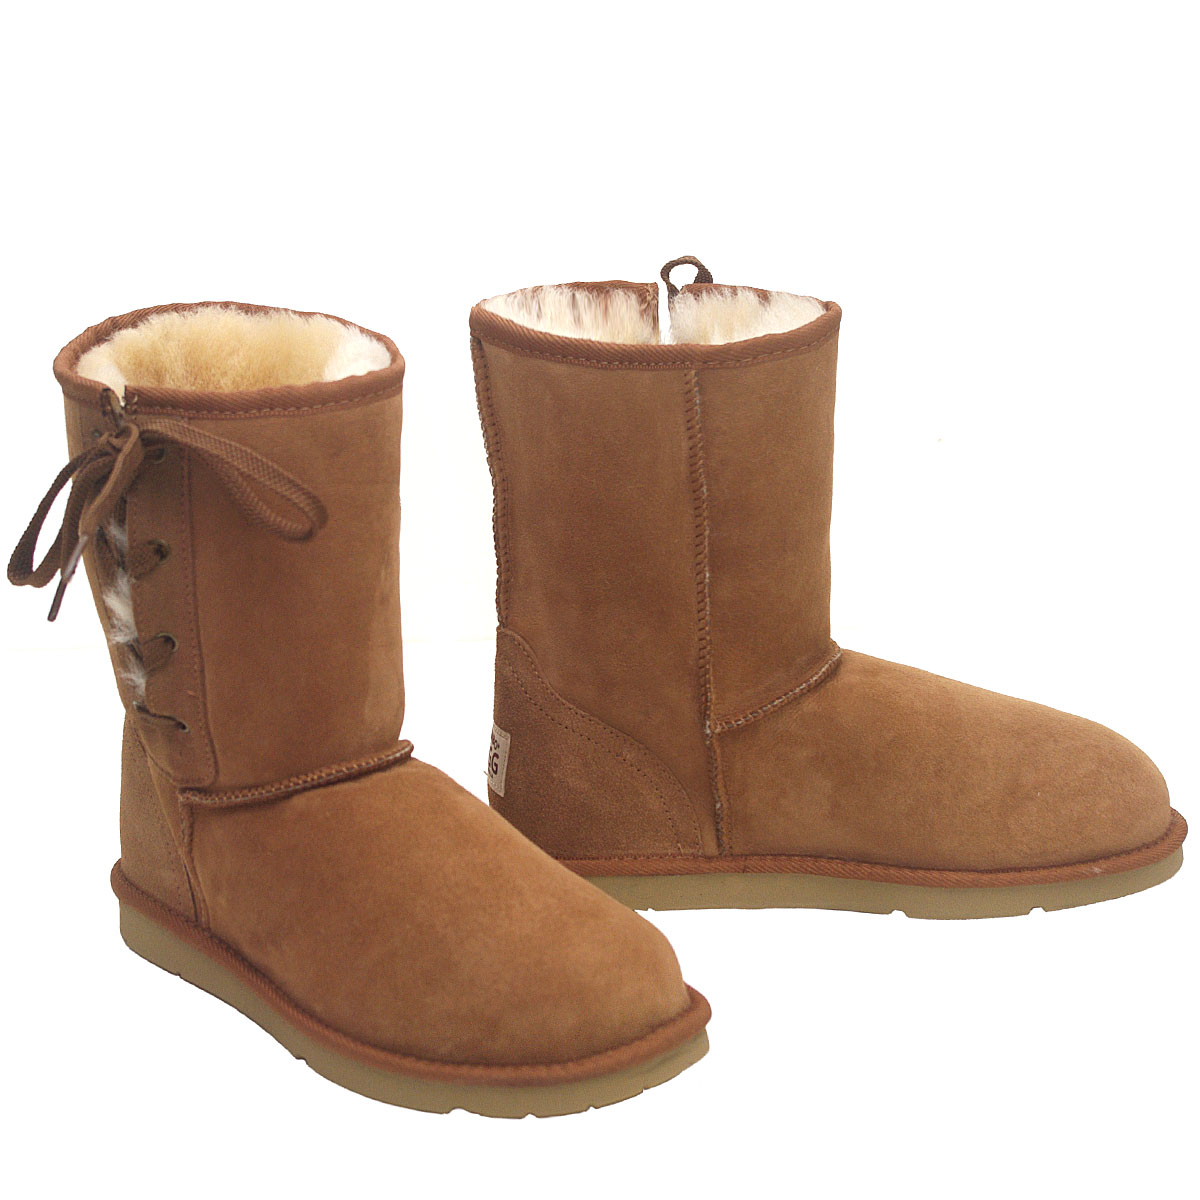 Lace-Up Ugg Boots Chestnut}